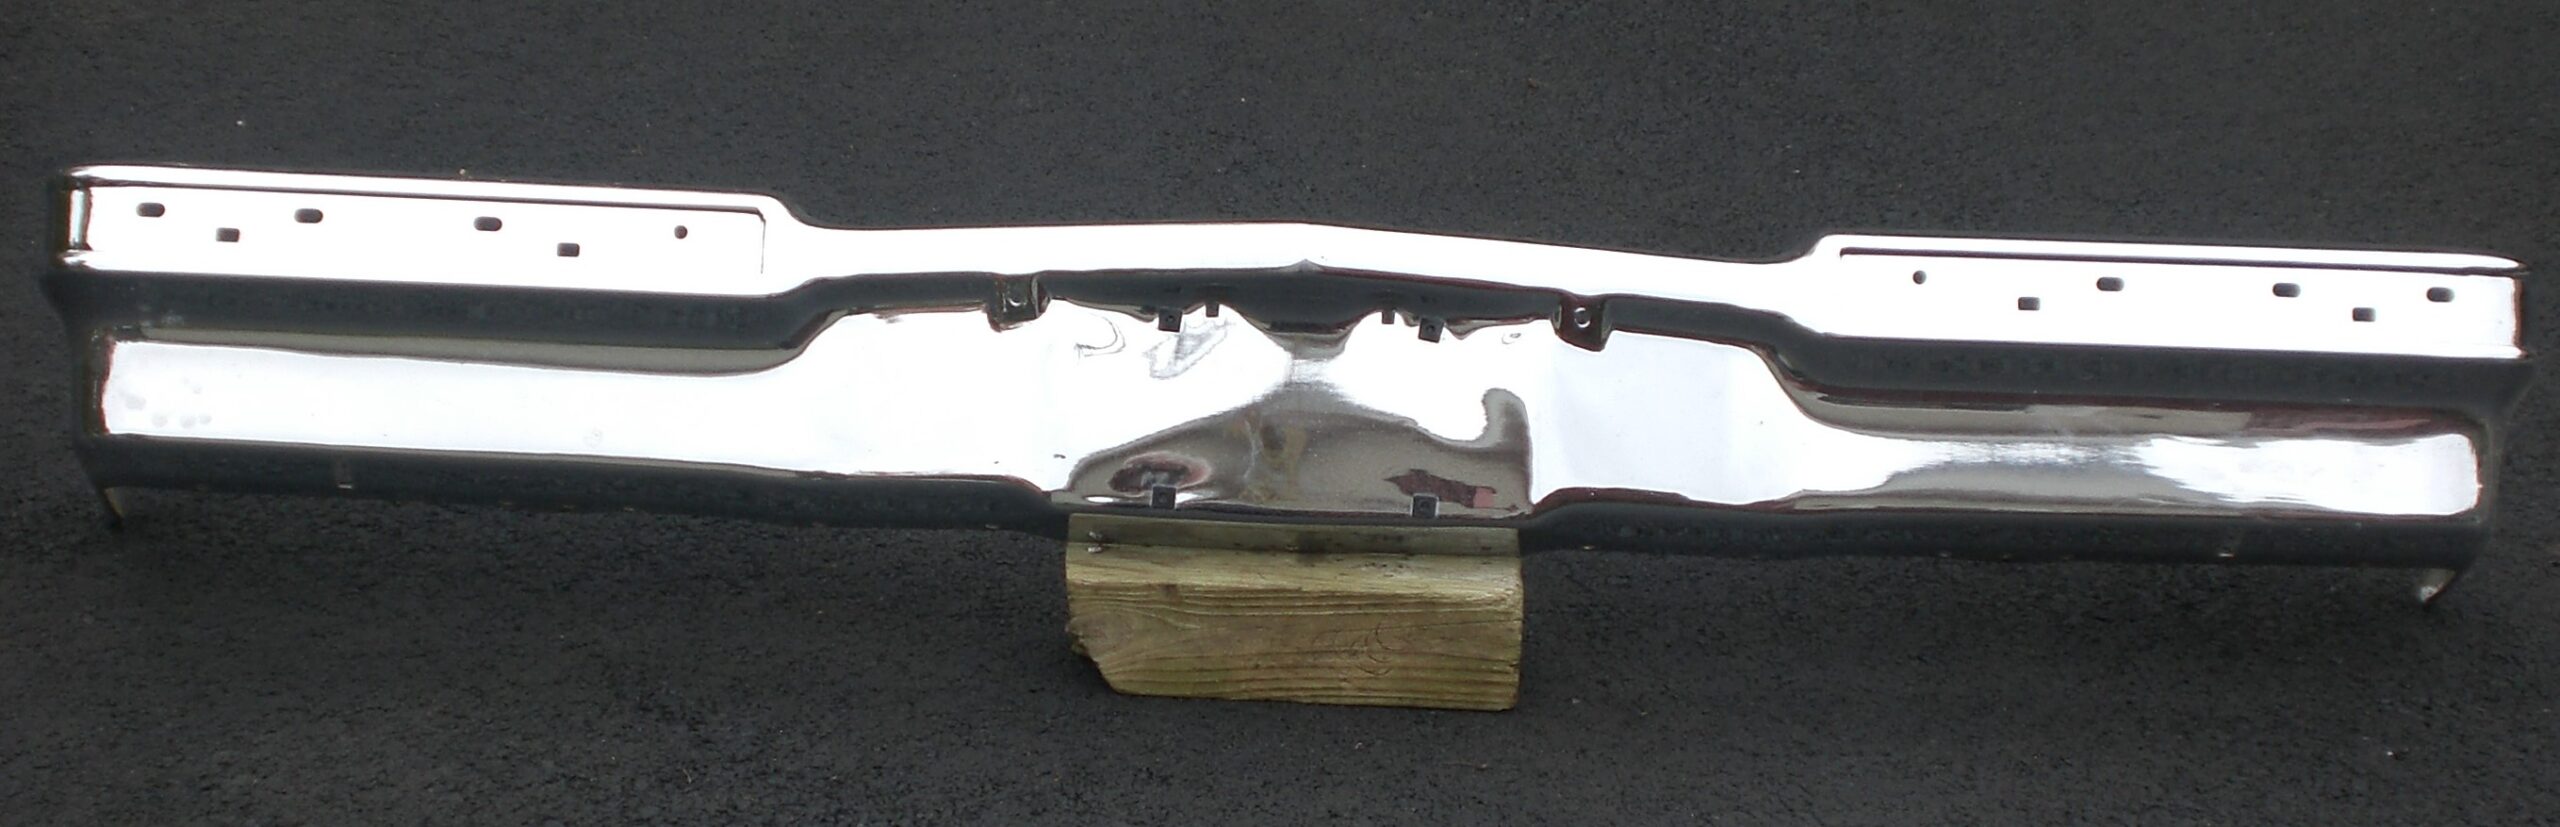 FACE BAR; FRONT BUMPER – EARLY DEALER TAKEOFF (#25517831-#1259154)